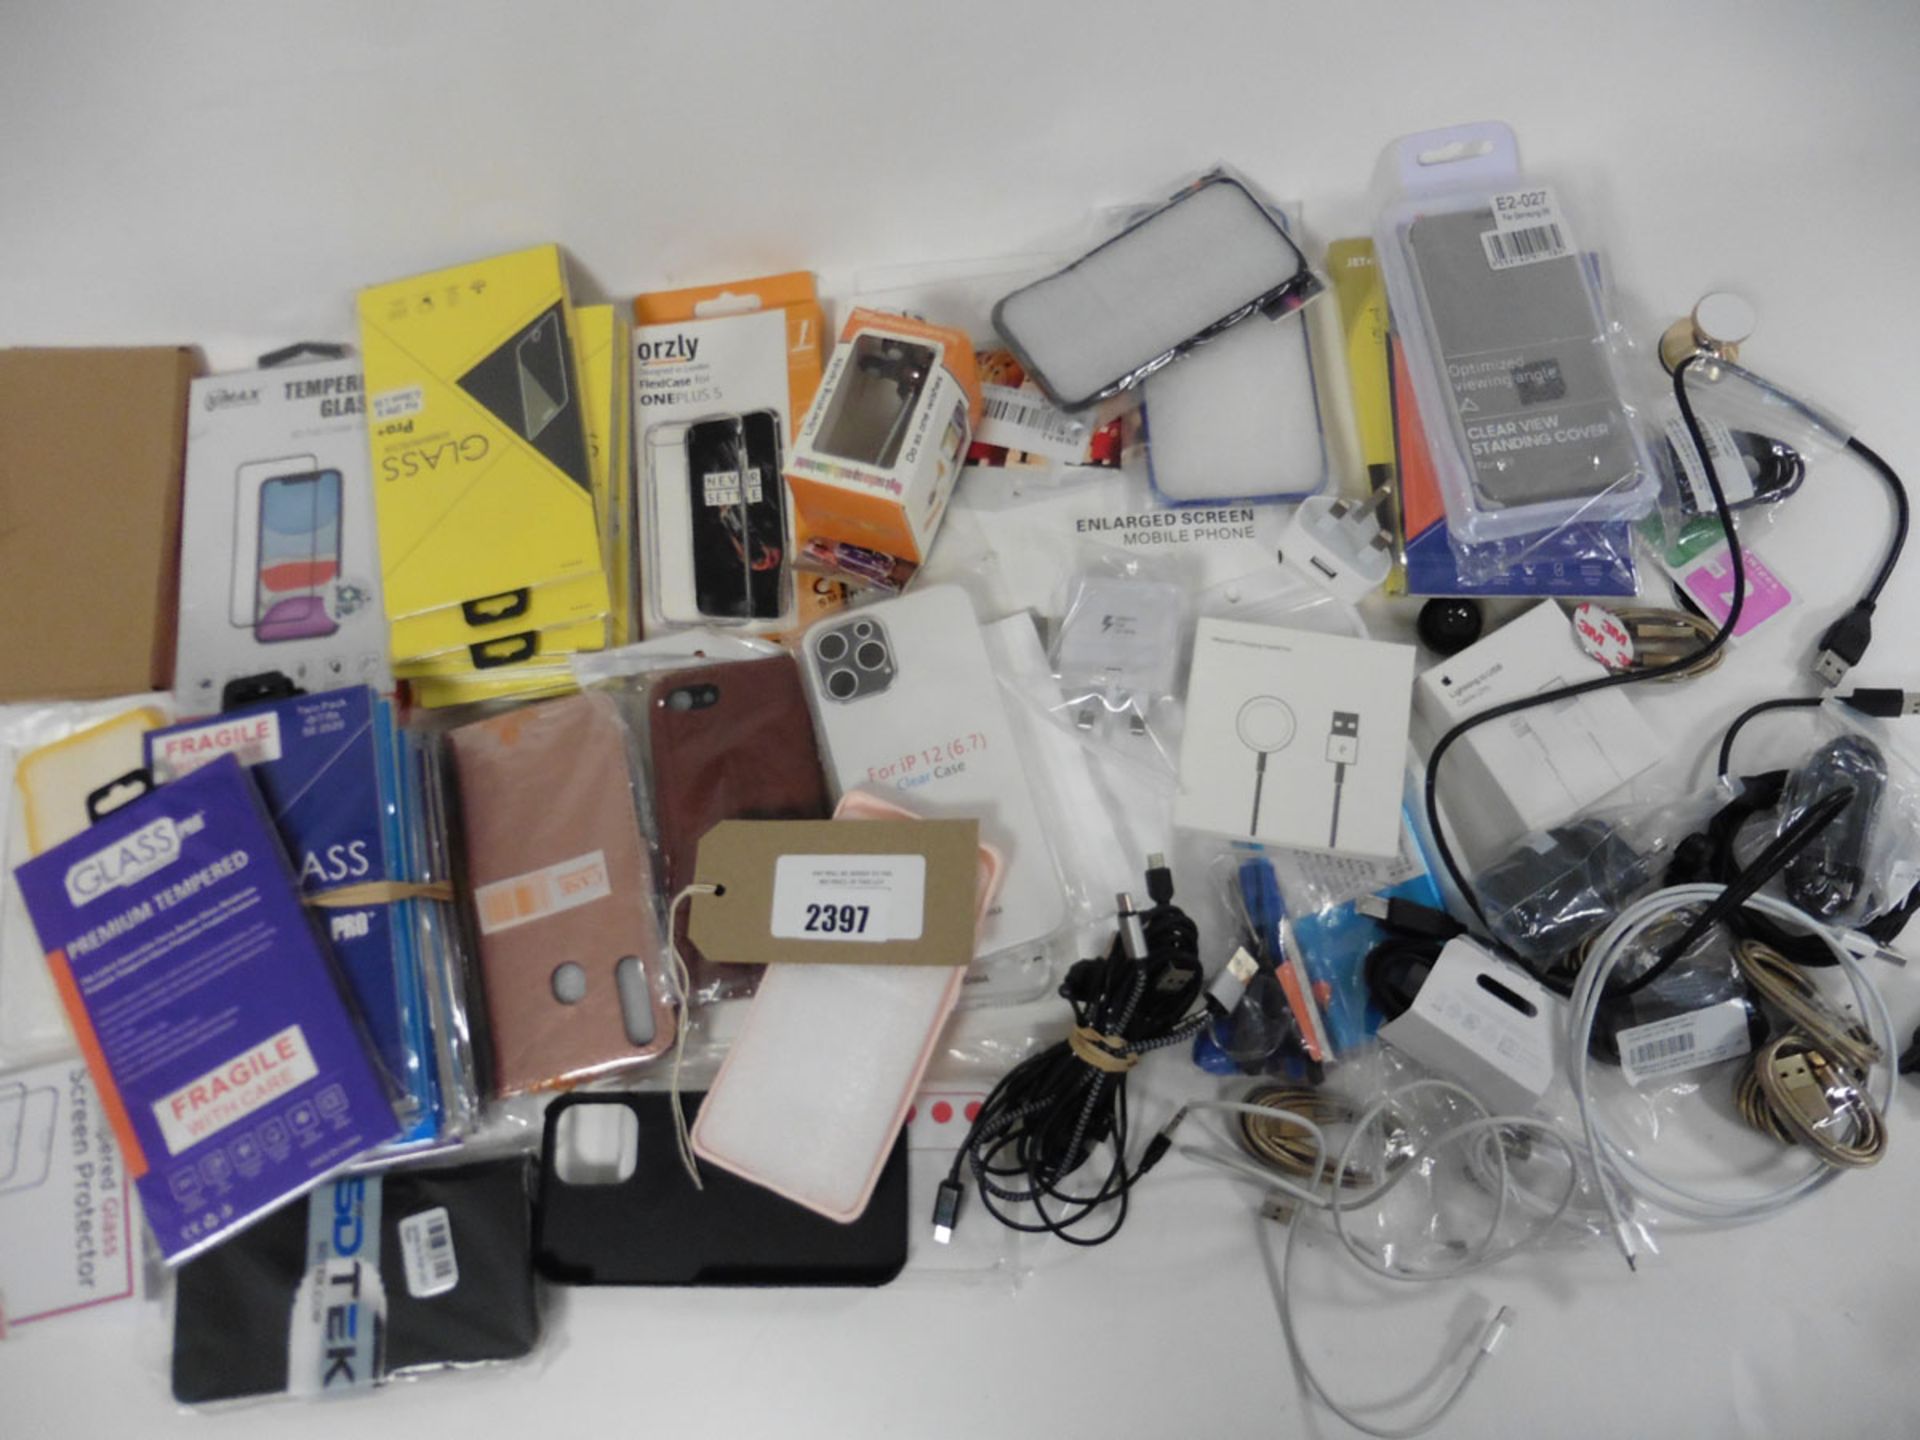 A bag of mobile phone accessories, lightening cables, USB-C, Glass screen protectors, cases etc.